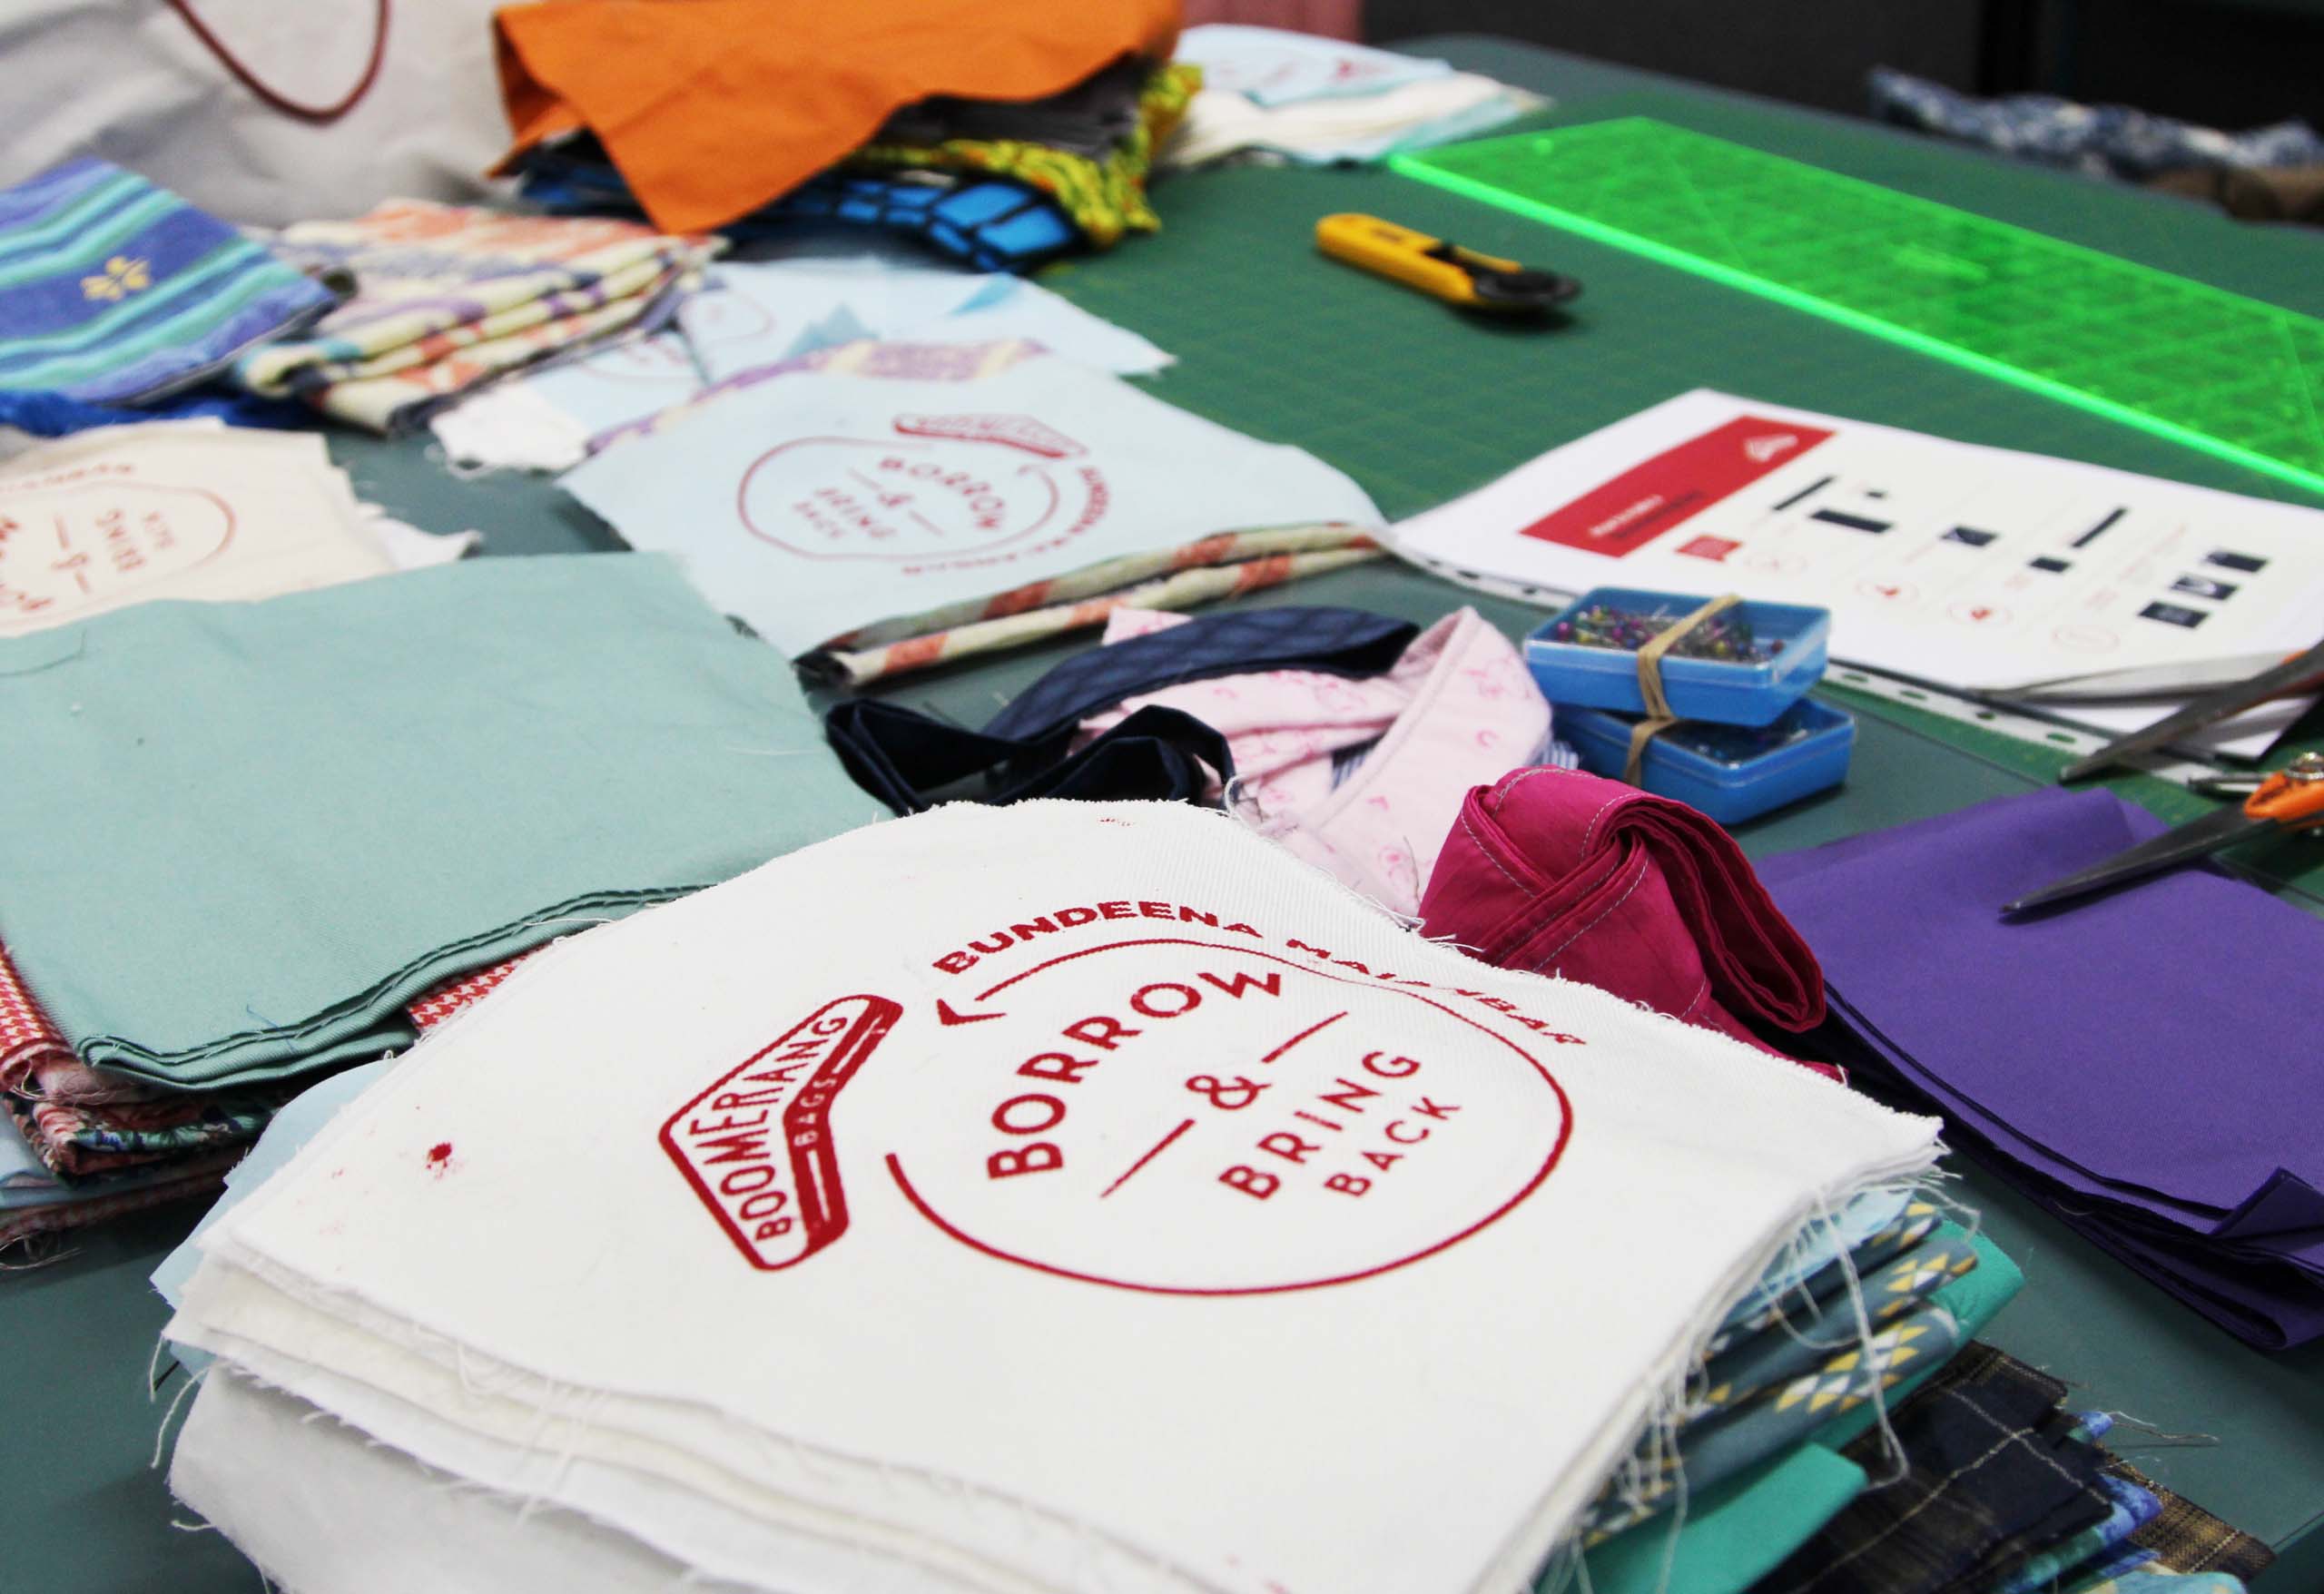 Help reduce the use of plastic bags in the community by sewing your own boomerang bag. Come along to Miranda Library to join the global, grassroots movement tackling plastic pollution.